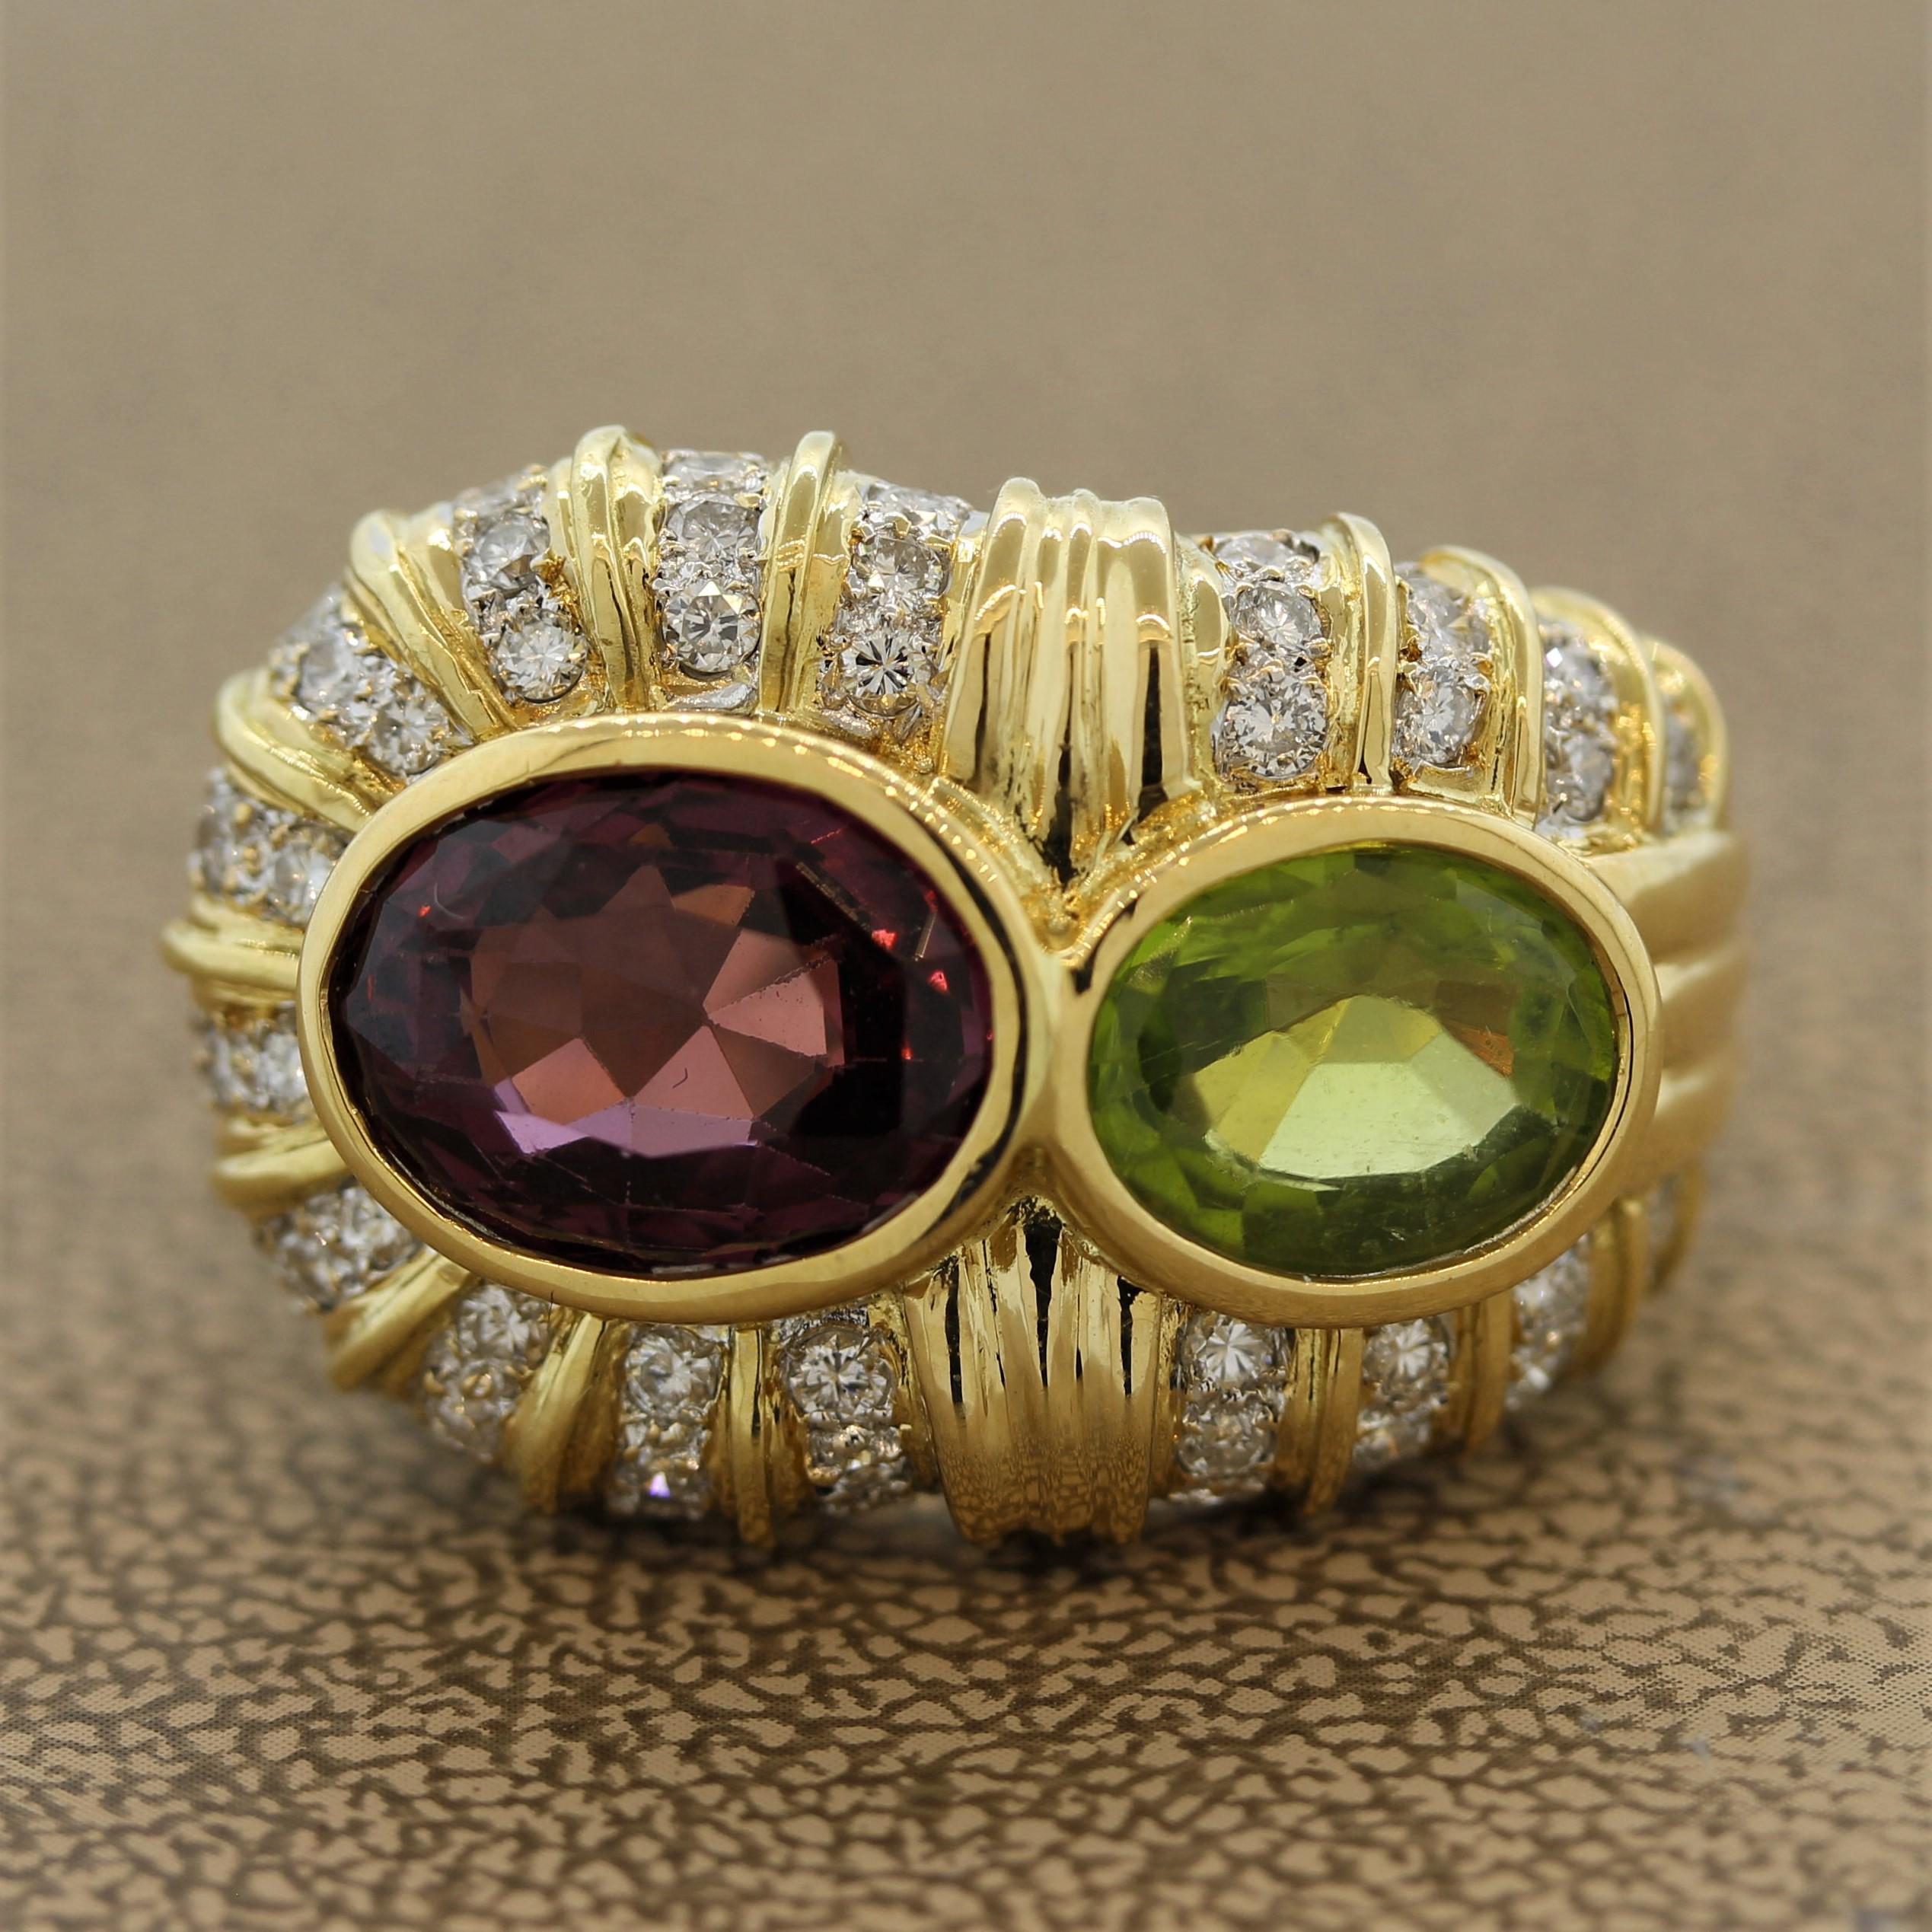 A truly unique one-of-a-kind ring. It features a fine purple spinel weighing 4.76 carats. Next to it is a 1.96 carat peridot which is also an oval shape and bezel set. The ring is accented by 0.95 carats of round brilliant cut diamonds which are set